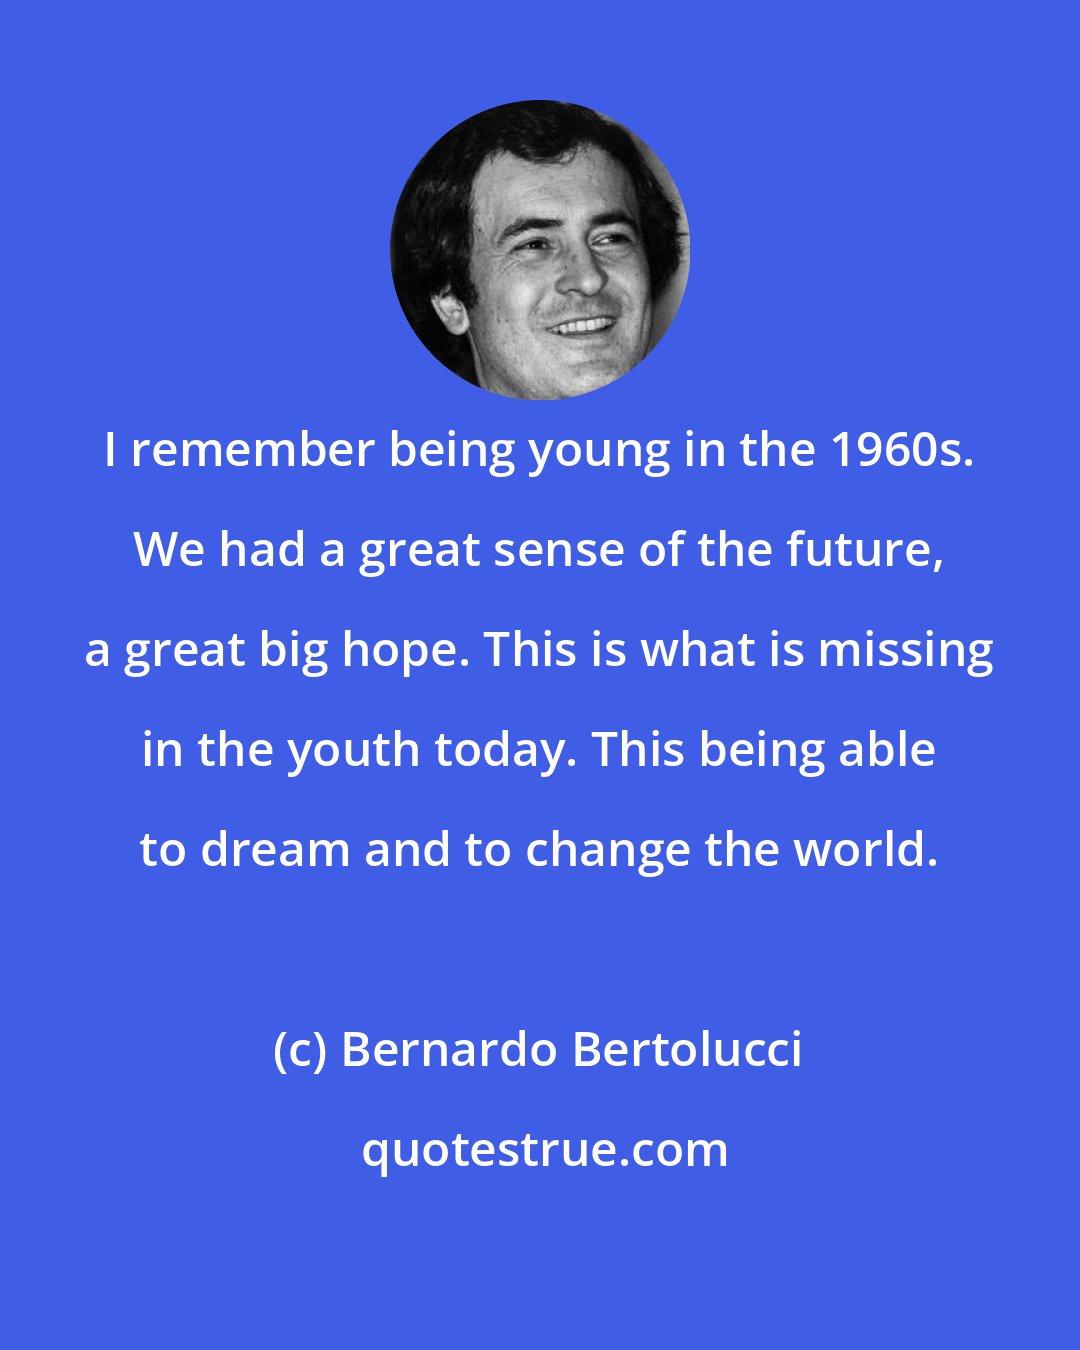 Bernardo Bertolucci: I remember being young in the 1960s. We had a great sense of the future, a great big hope. This is what is missing in the youth today. This being able to dream and to change the world.